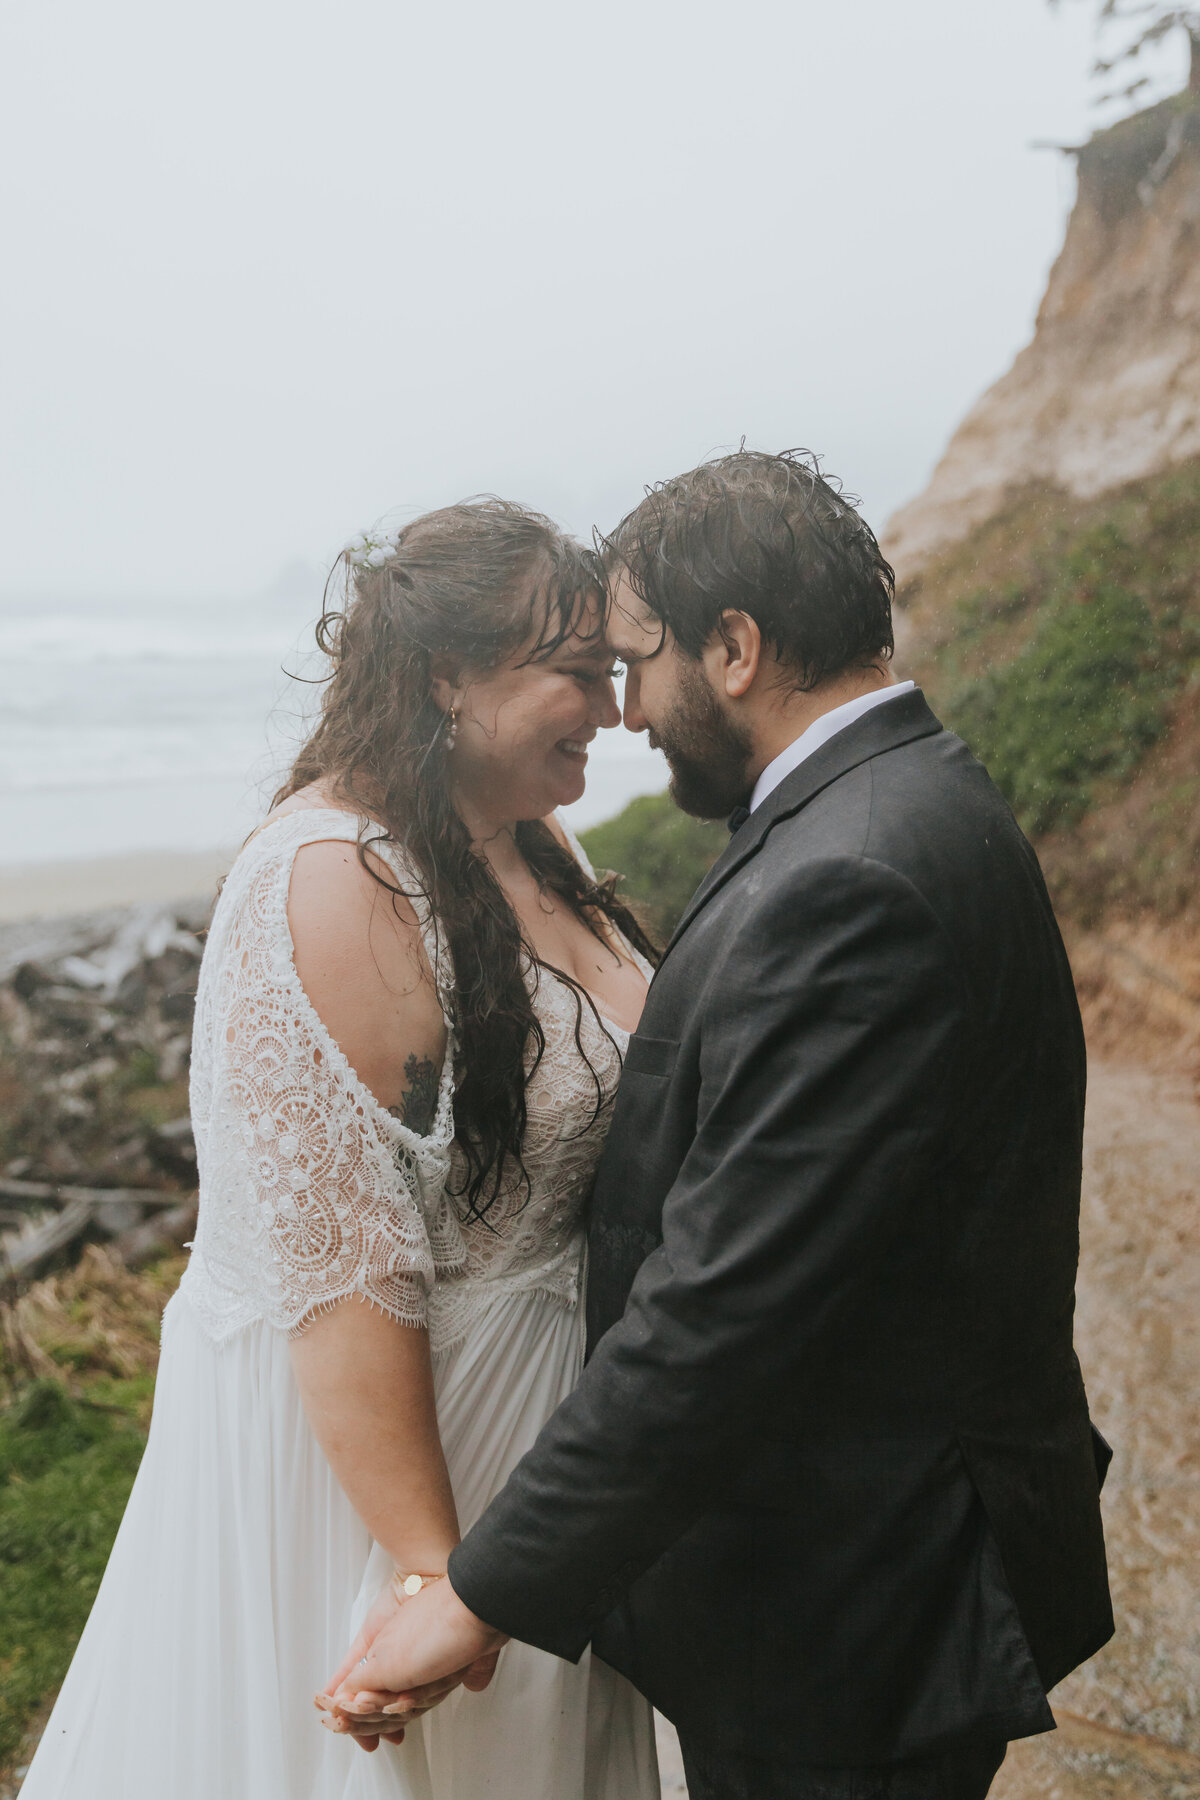 Marissa-Solini-Photography-Cannon-Beach-Rainy-Forest-Elopement-Dylann&Roy-9